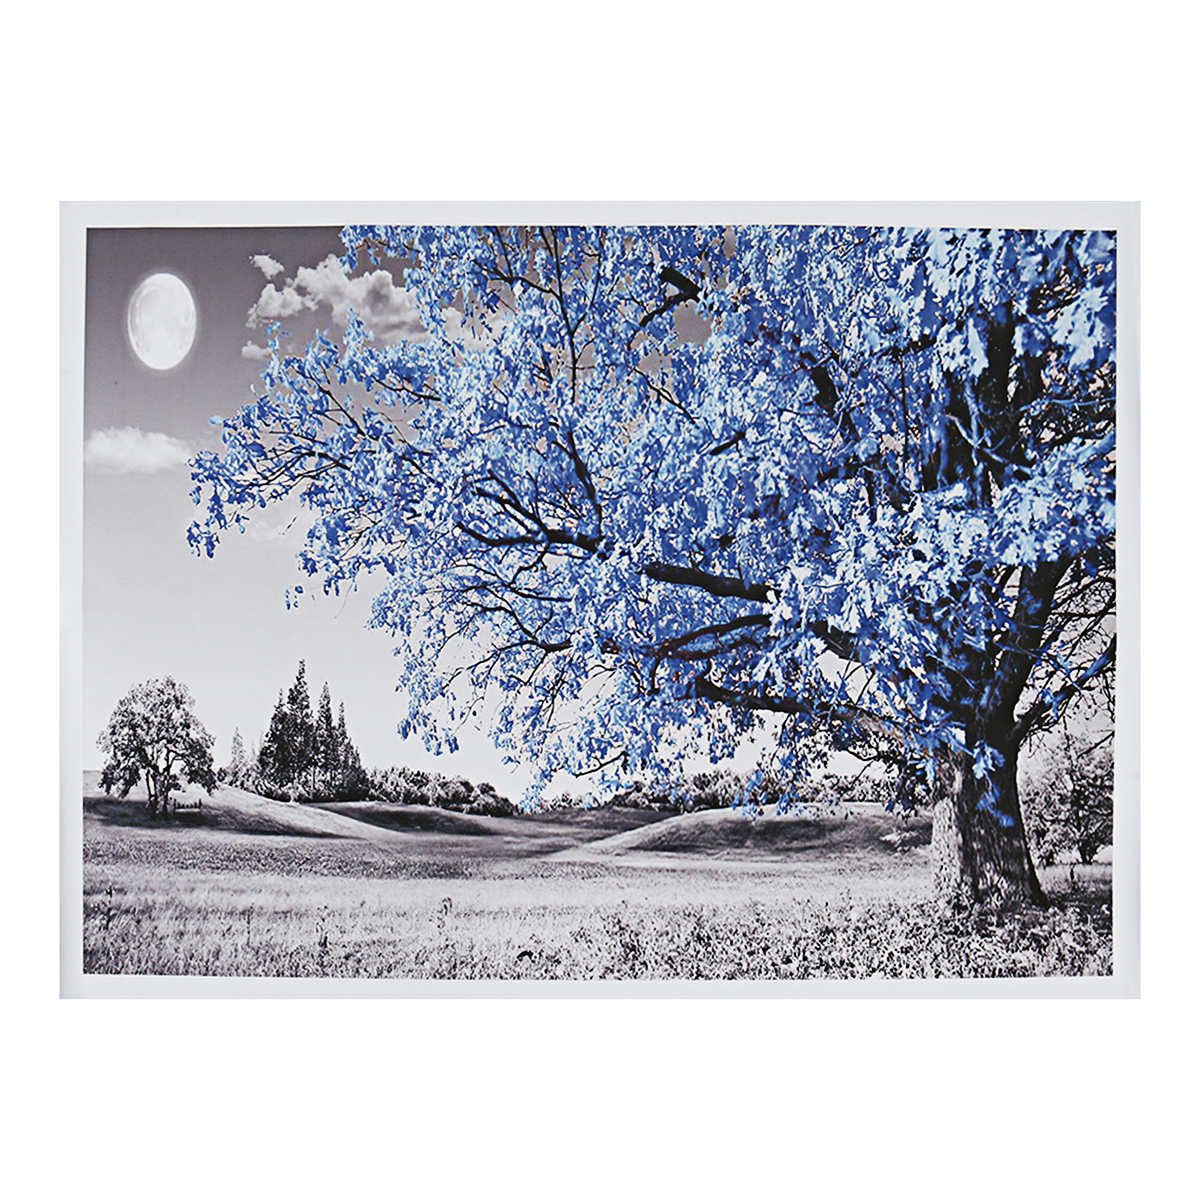 Find 1 Piece Big Tree Canvas Painting Wall Decorative Print Art Picture Unframed Wall Hanging Home Office Decorations for Sale on Gipsybee.com with cryptocurrencies